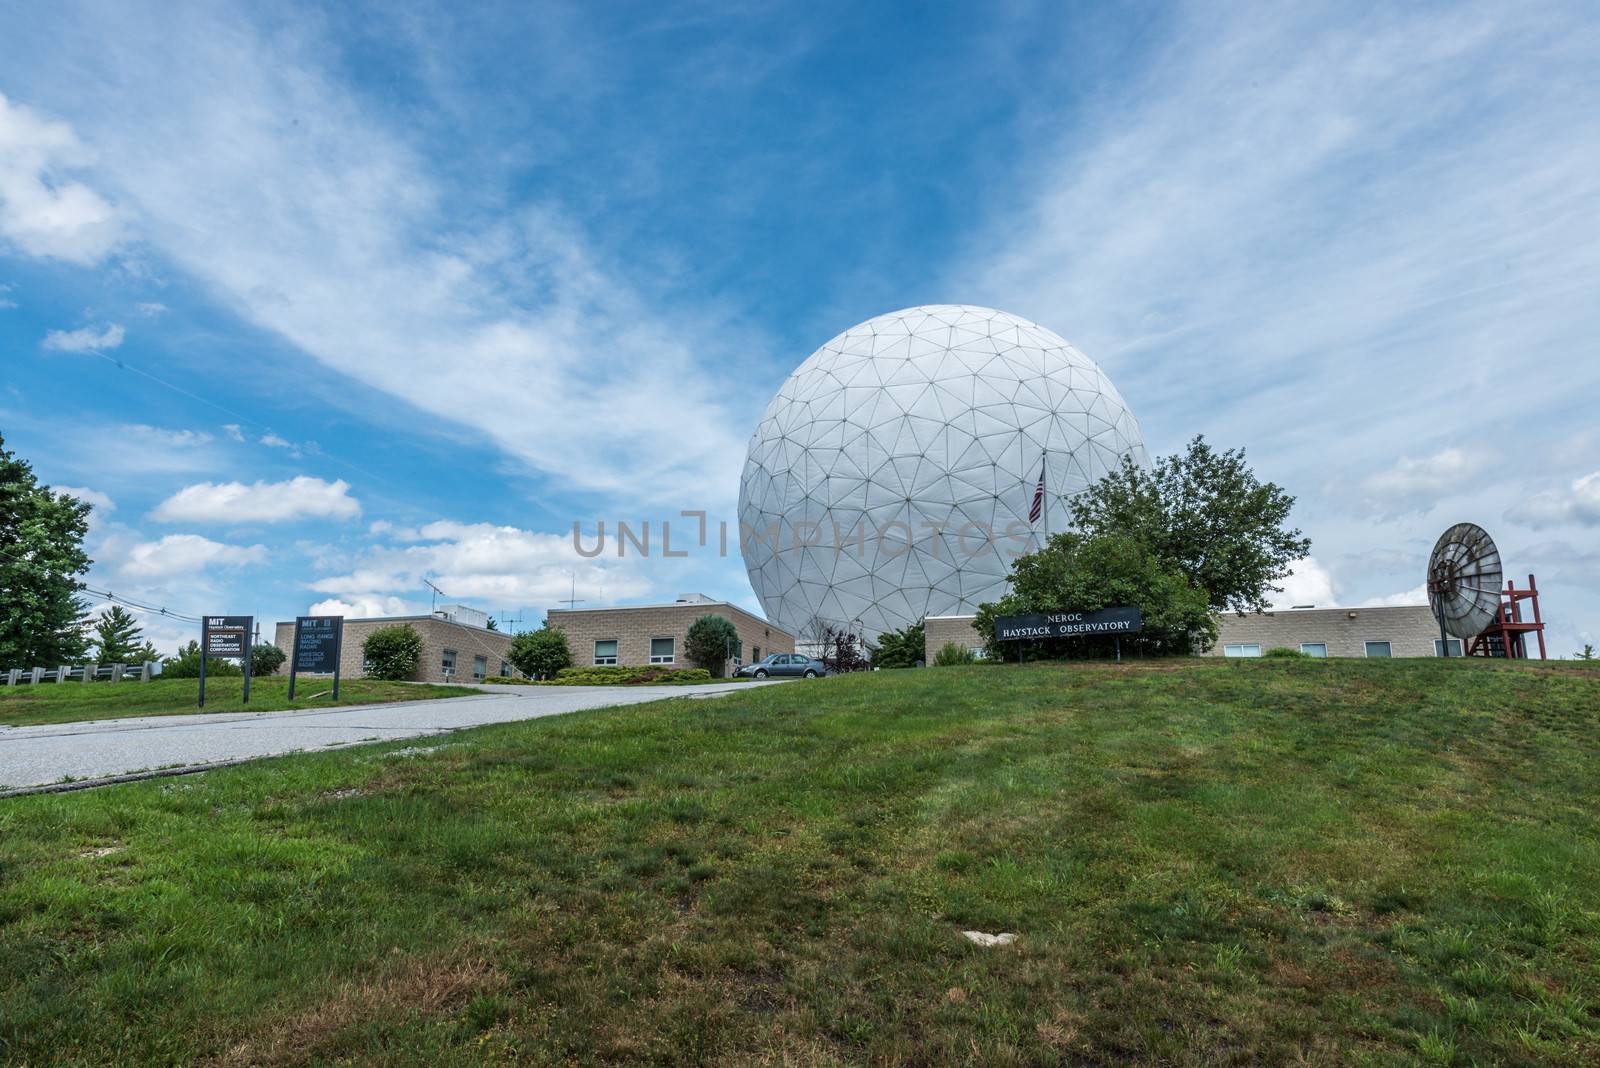 Haystack Observatory of Massachusetts Institute of Technology by IVYPHOTOS